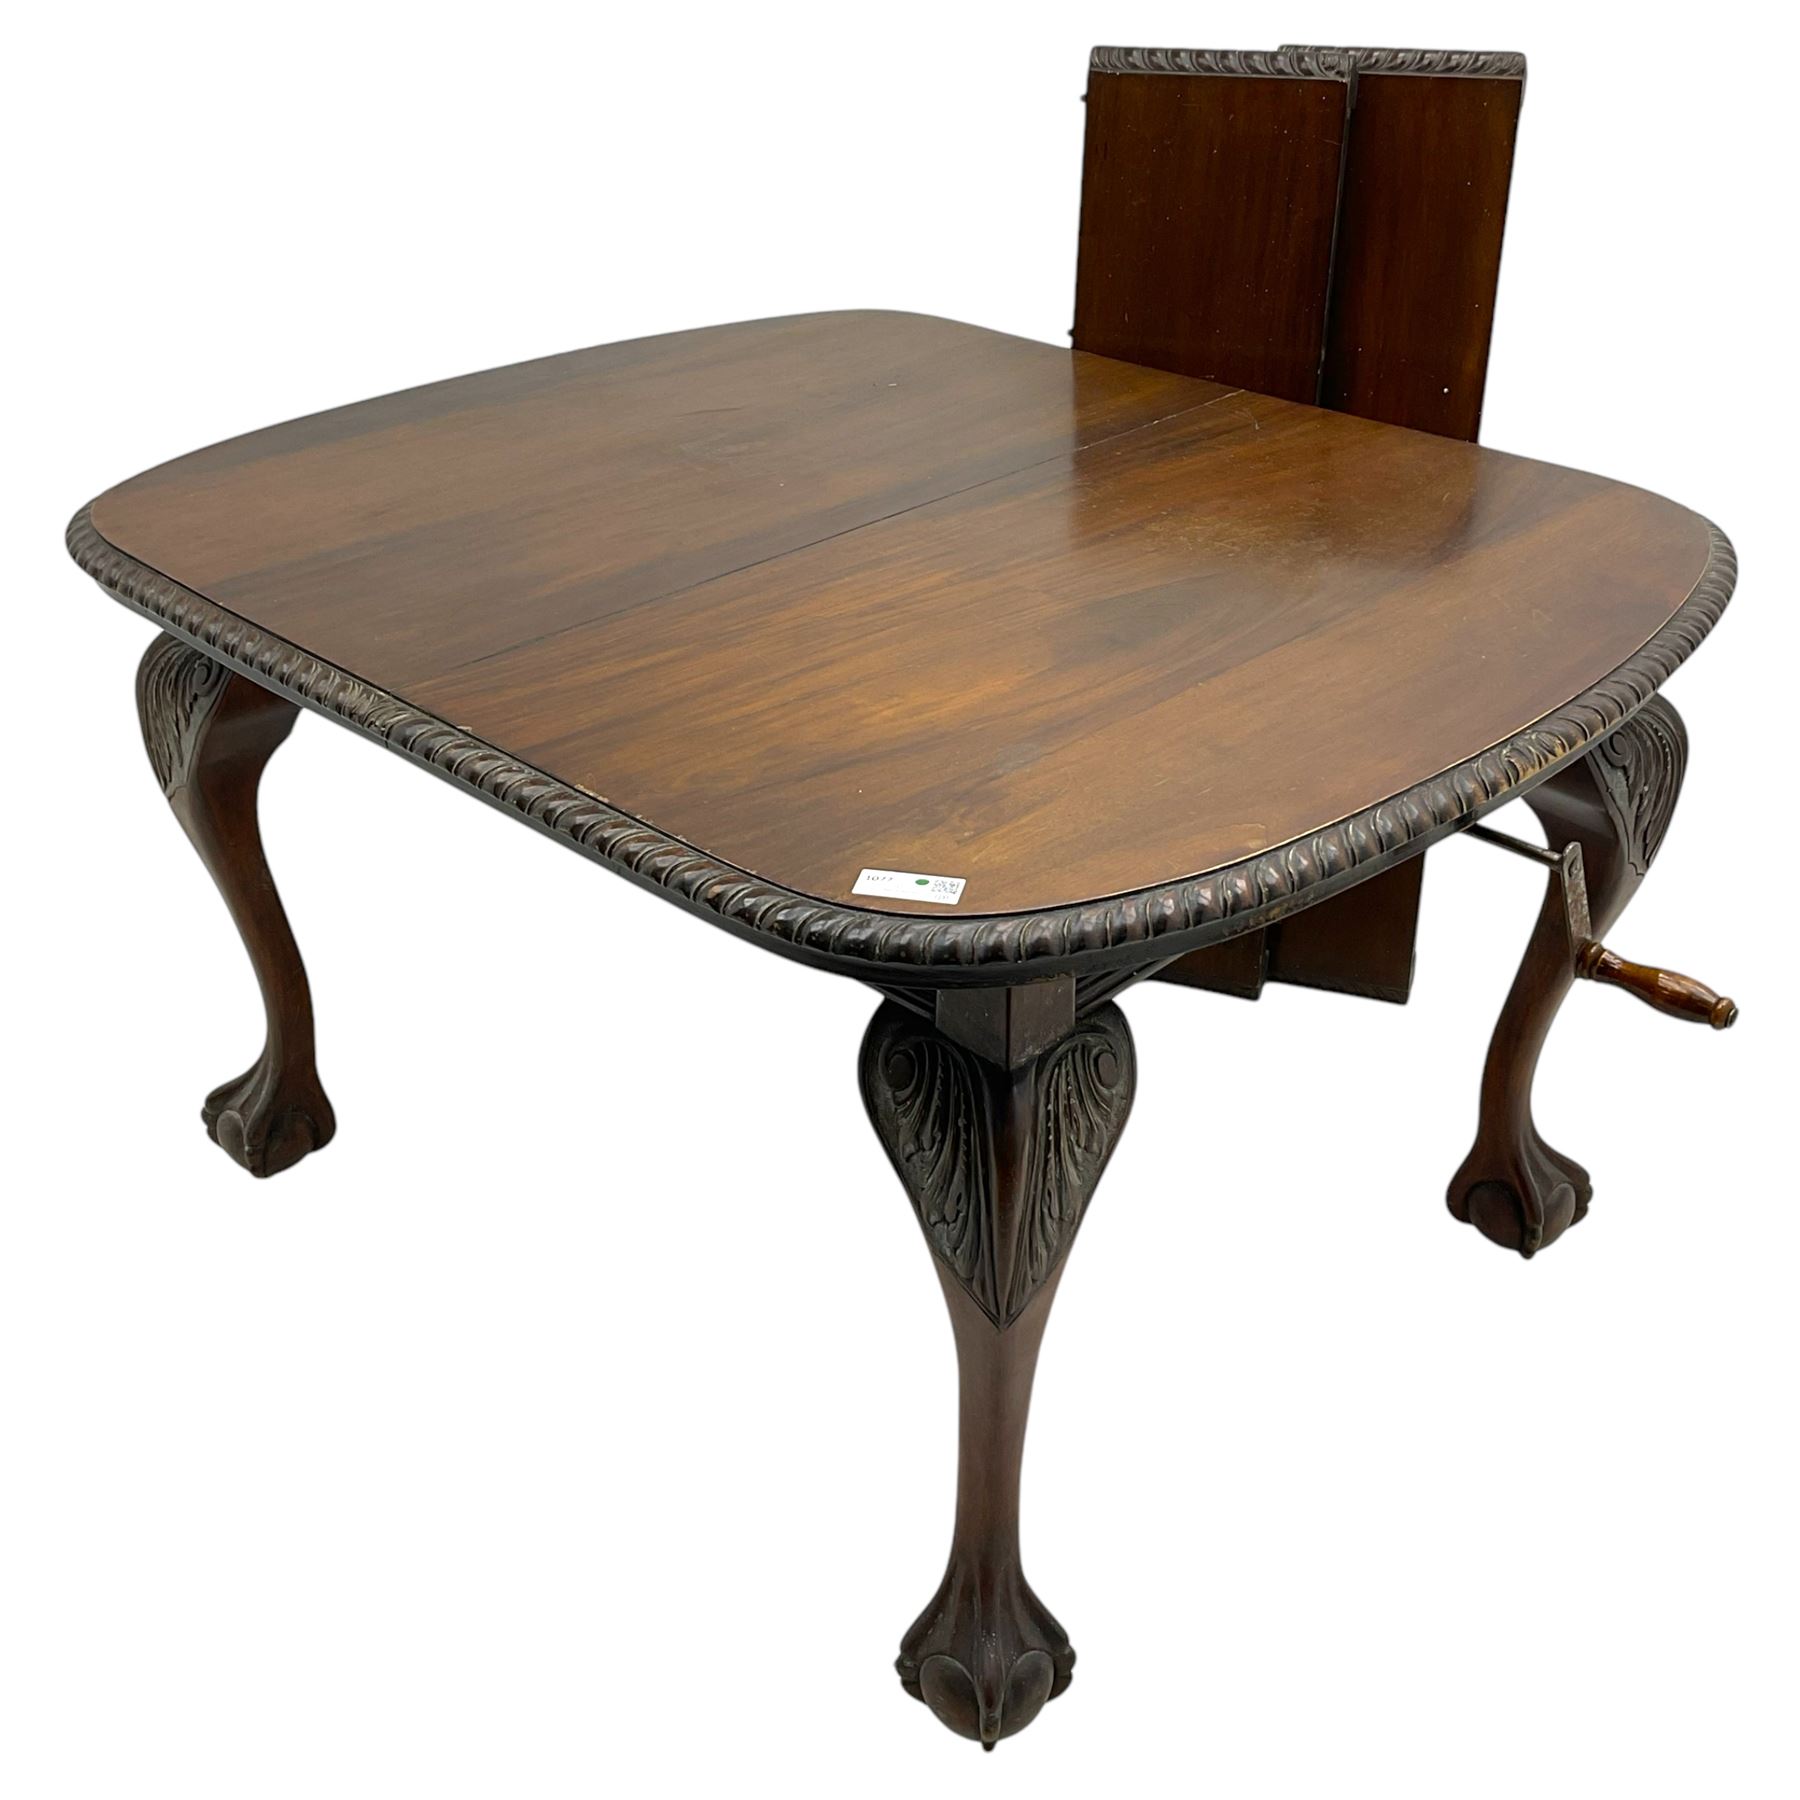 Early 20th century Georgian design mahogany extending dining table - Image 8 of 8